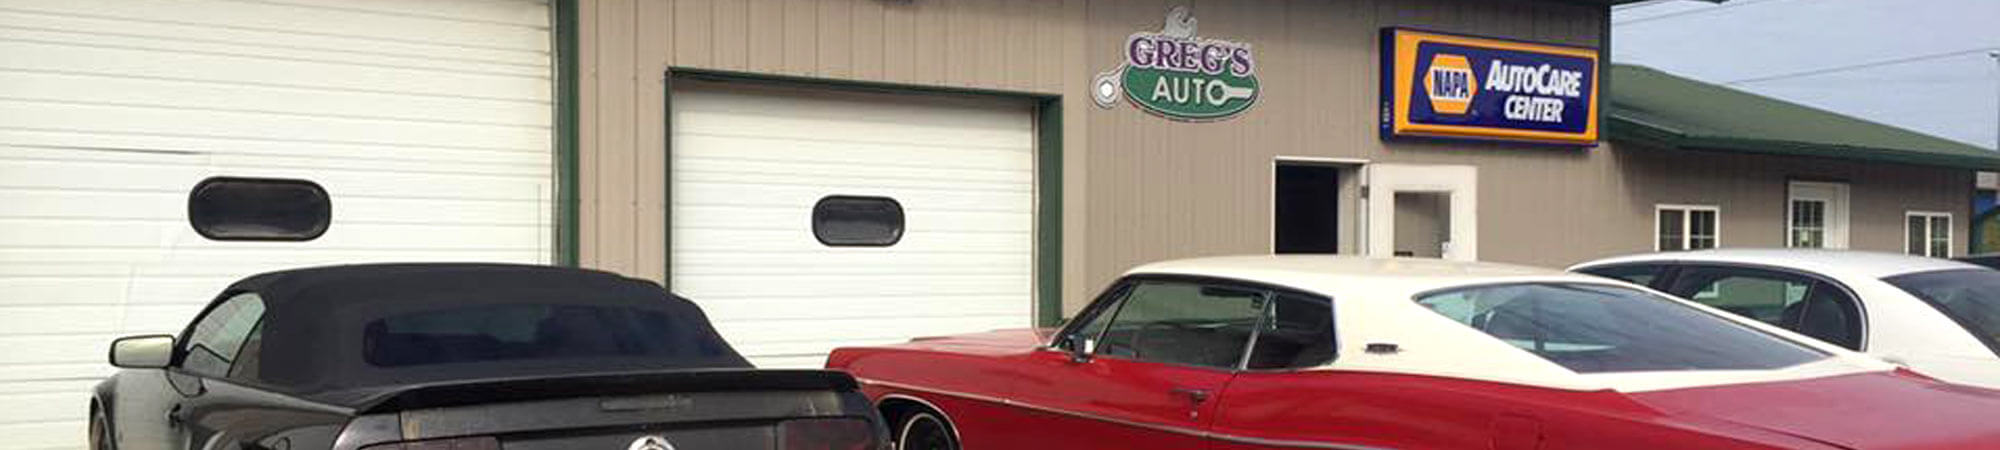 Exterior of Greg's Auto shop in Le Center with a mix of new, old, and classic cars parked in front of the auto bay doors